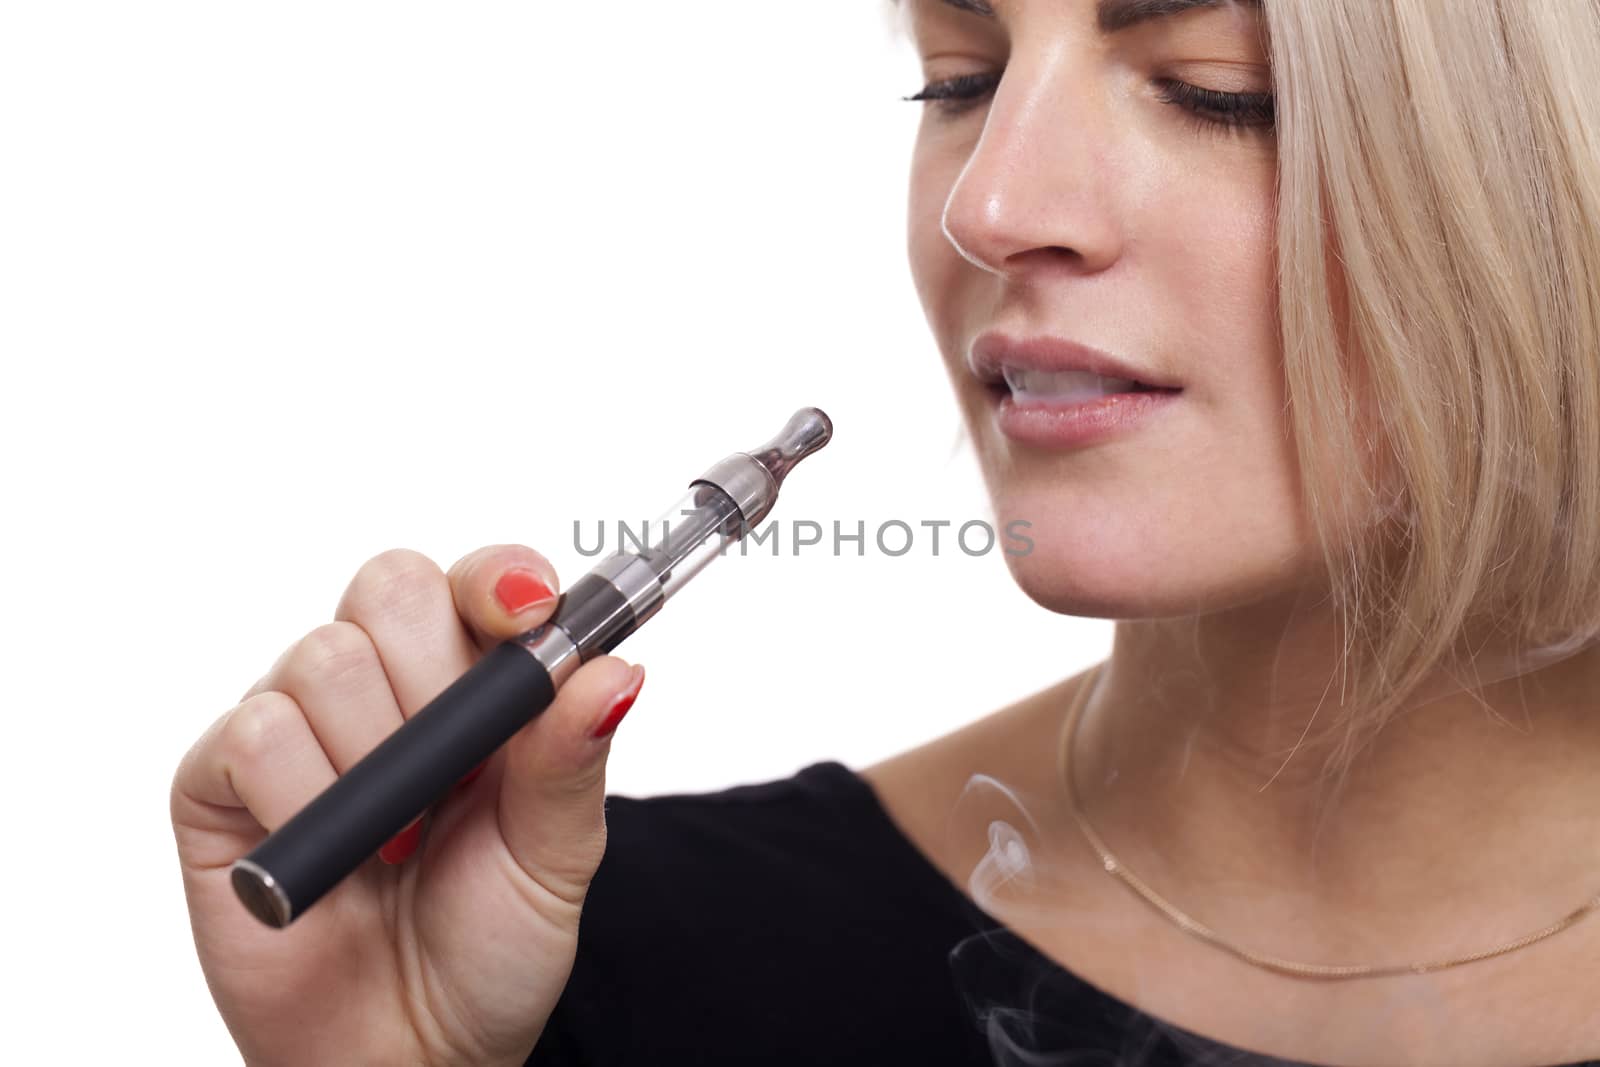 Close up Serious Facial Expression of a Young Blond Woman Smoking Using E- Cigarette on a White Background